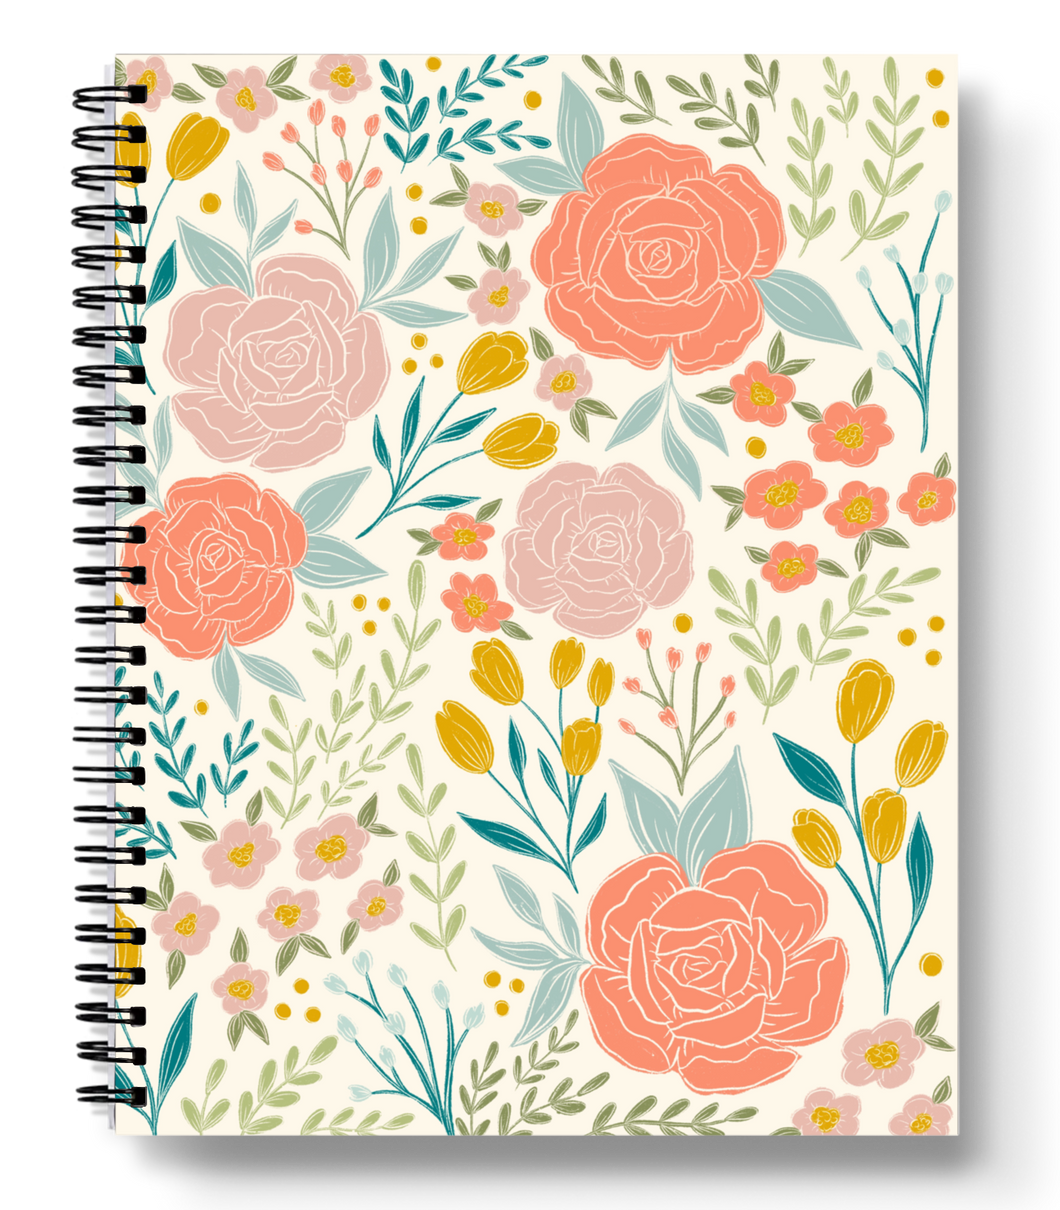 Peonies and Tulips Spiral Lined Notebook